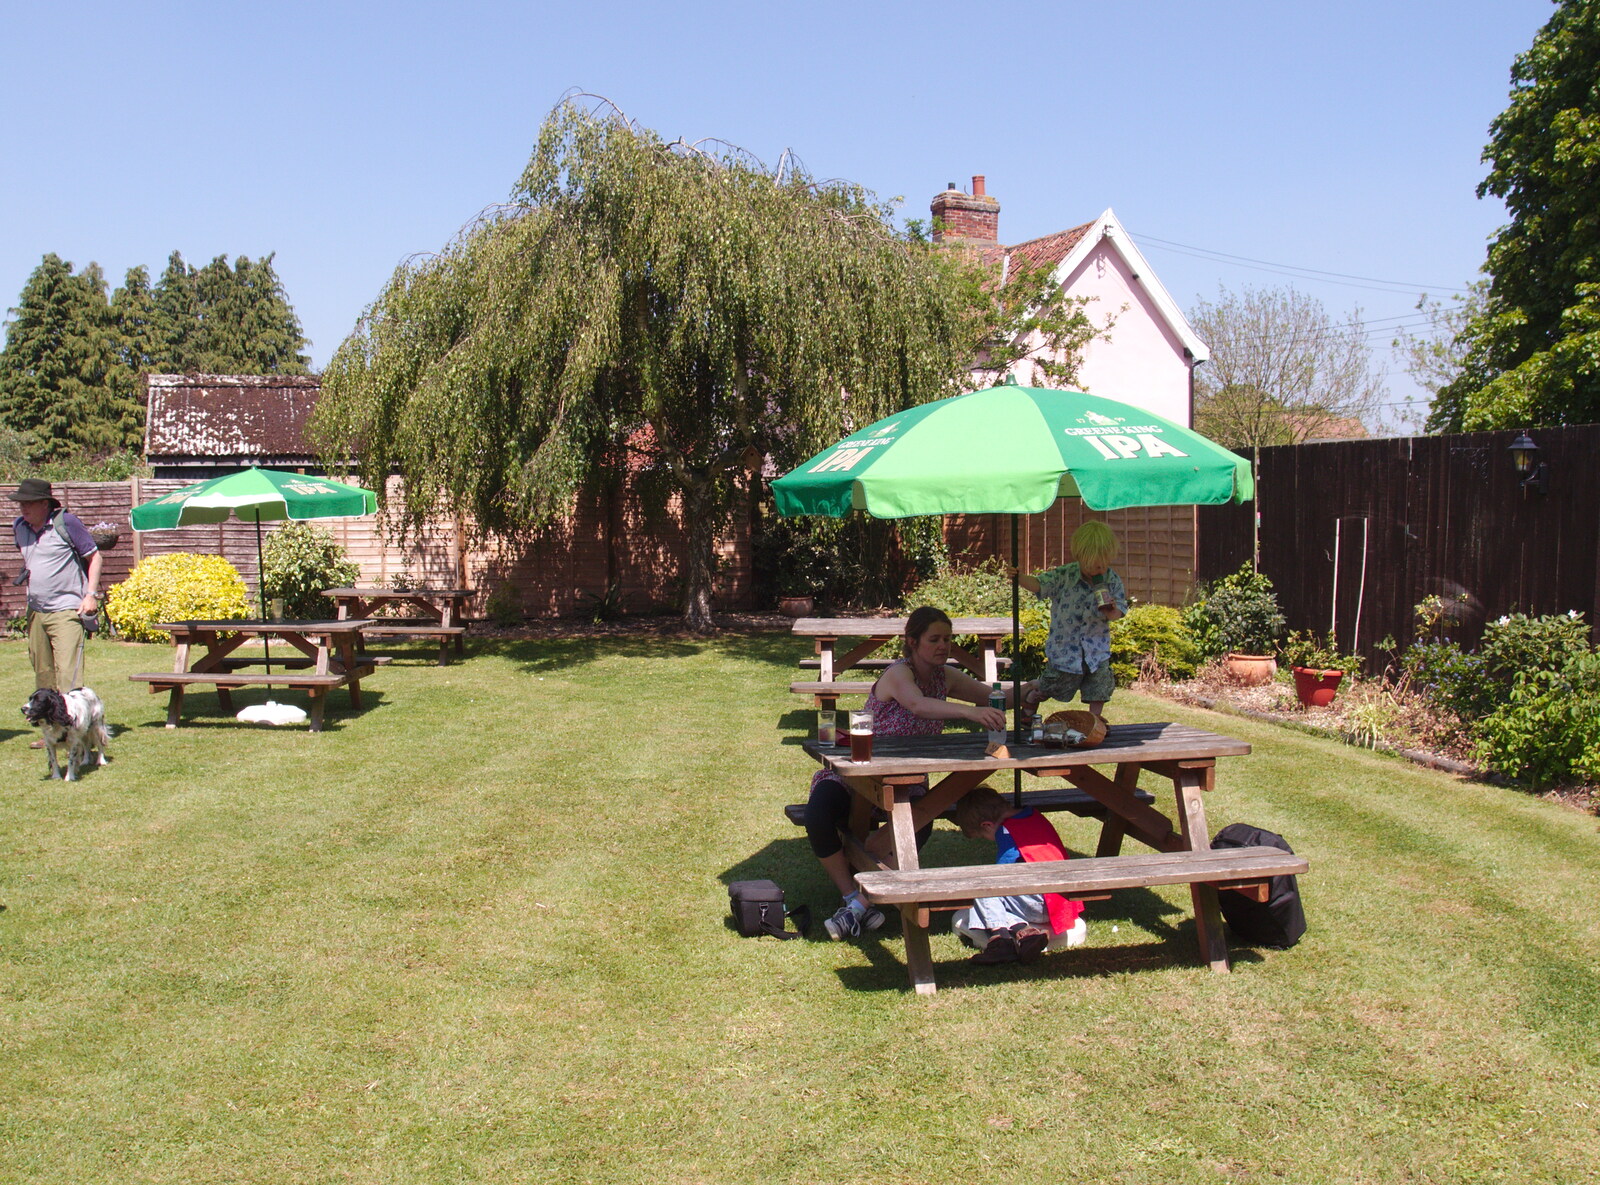 The Horseshoes' beer garden from Thornham Four Horseshoes, and the Oaksmere, Brome, Suffolk - 17th May 2014